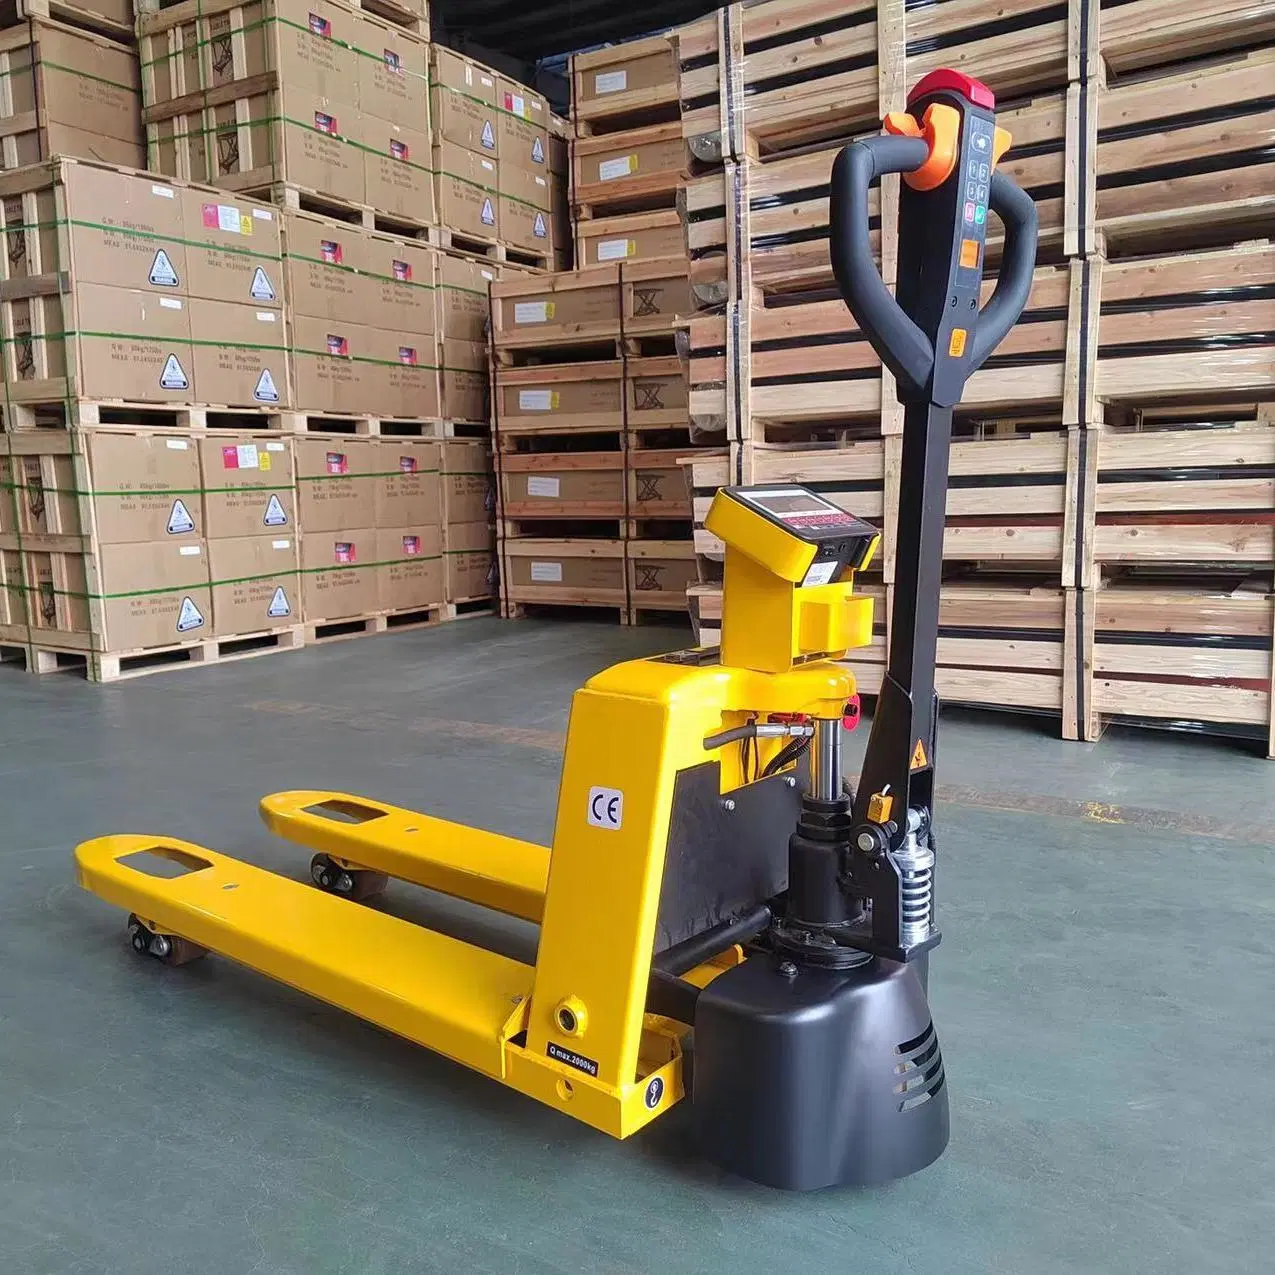 China Factory OEM/ODM Electric Battery Powered Forklift Truck Scale with CE for Material Weighing